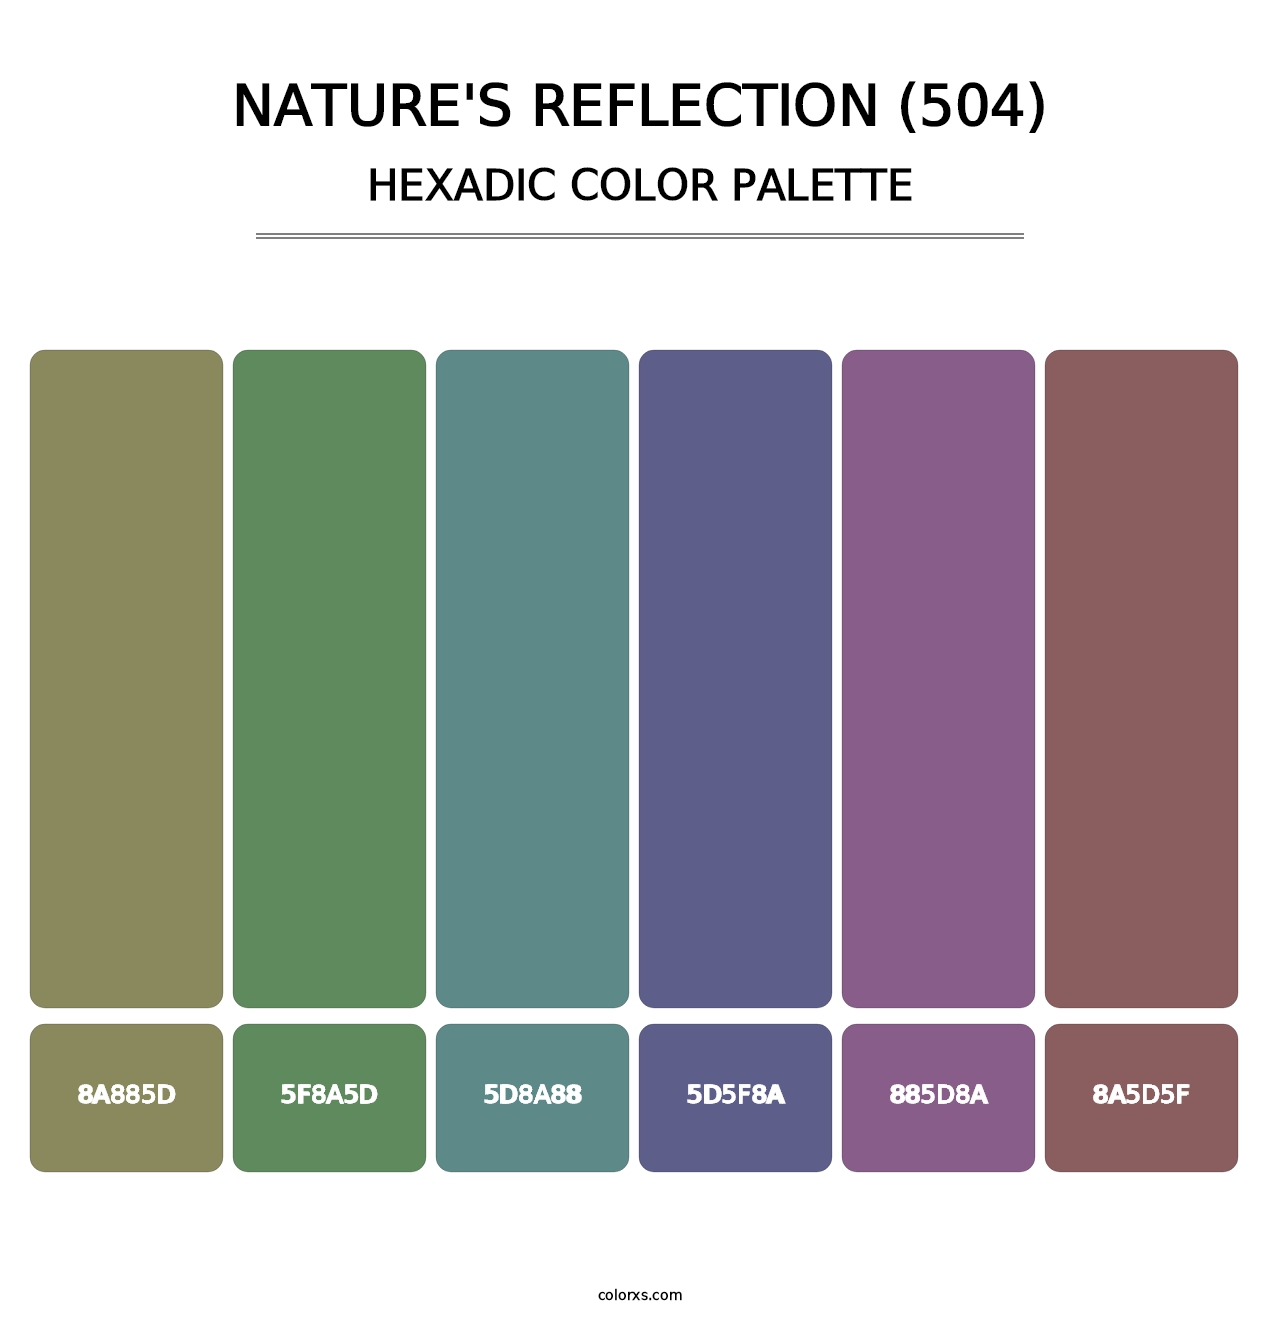 Nature's Reflection (504) - Hexadic Color Palette